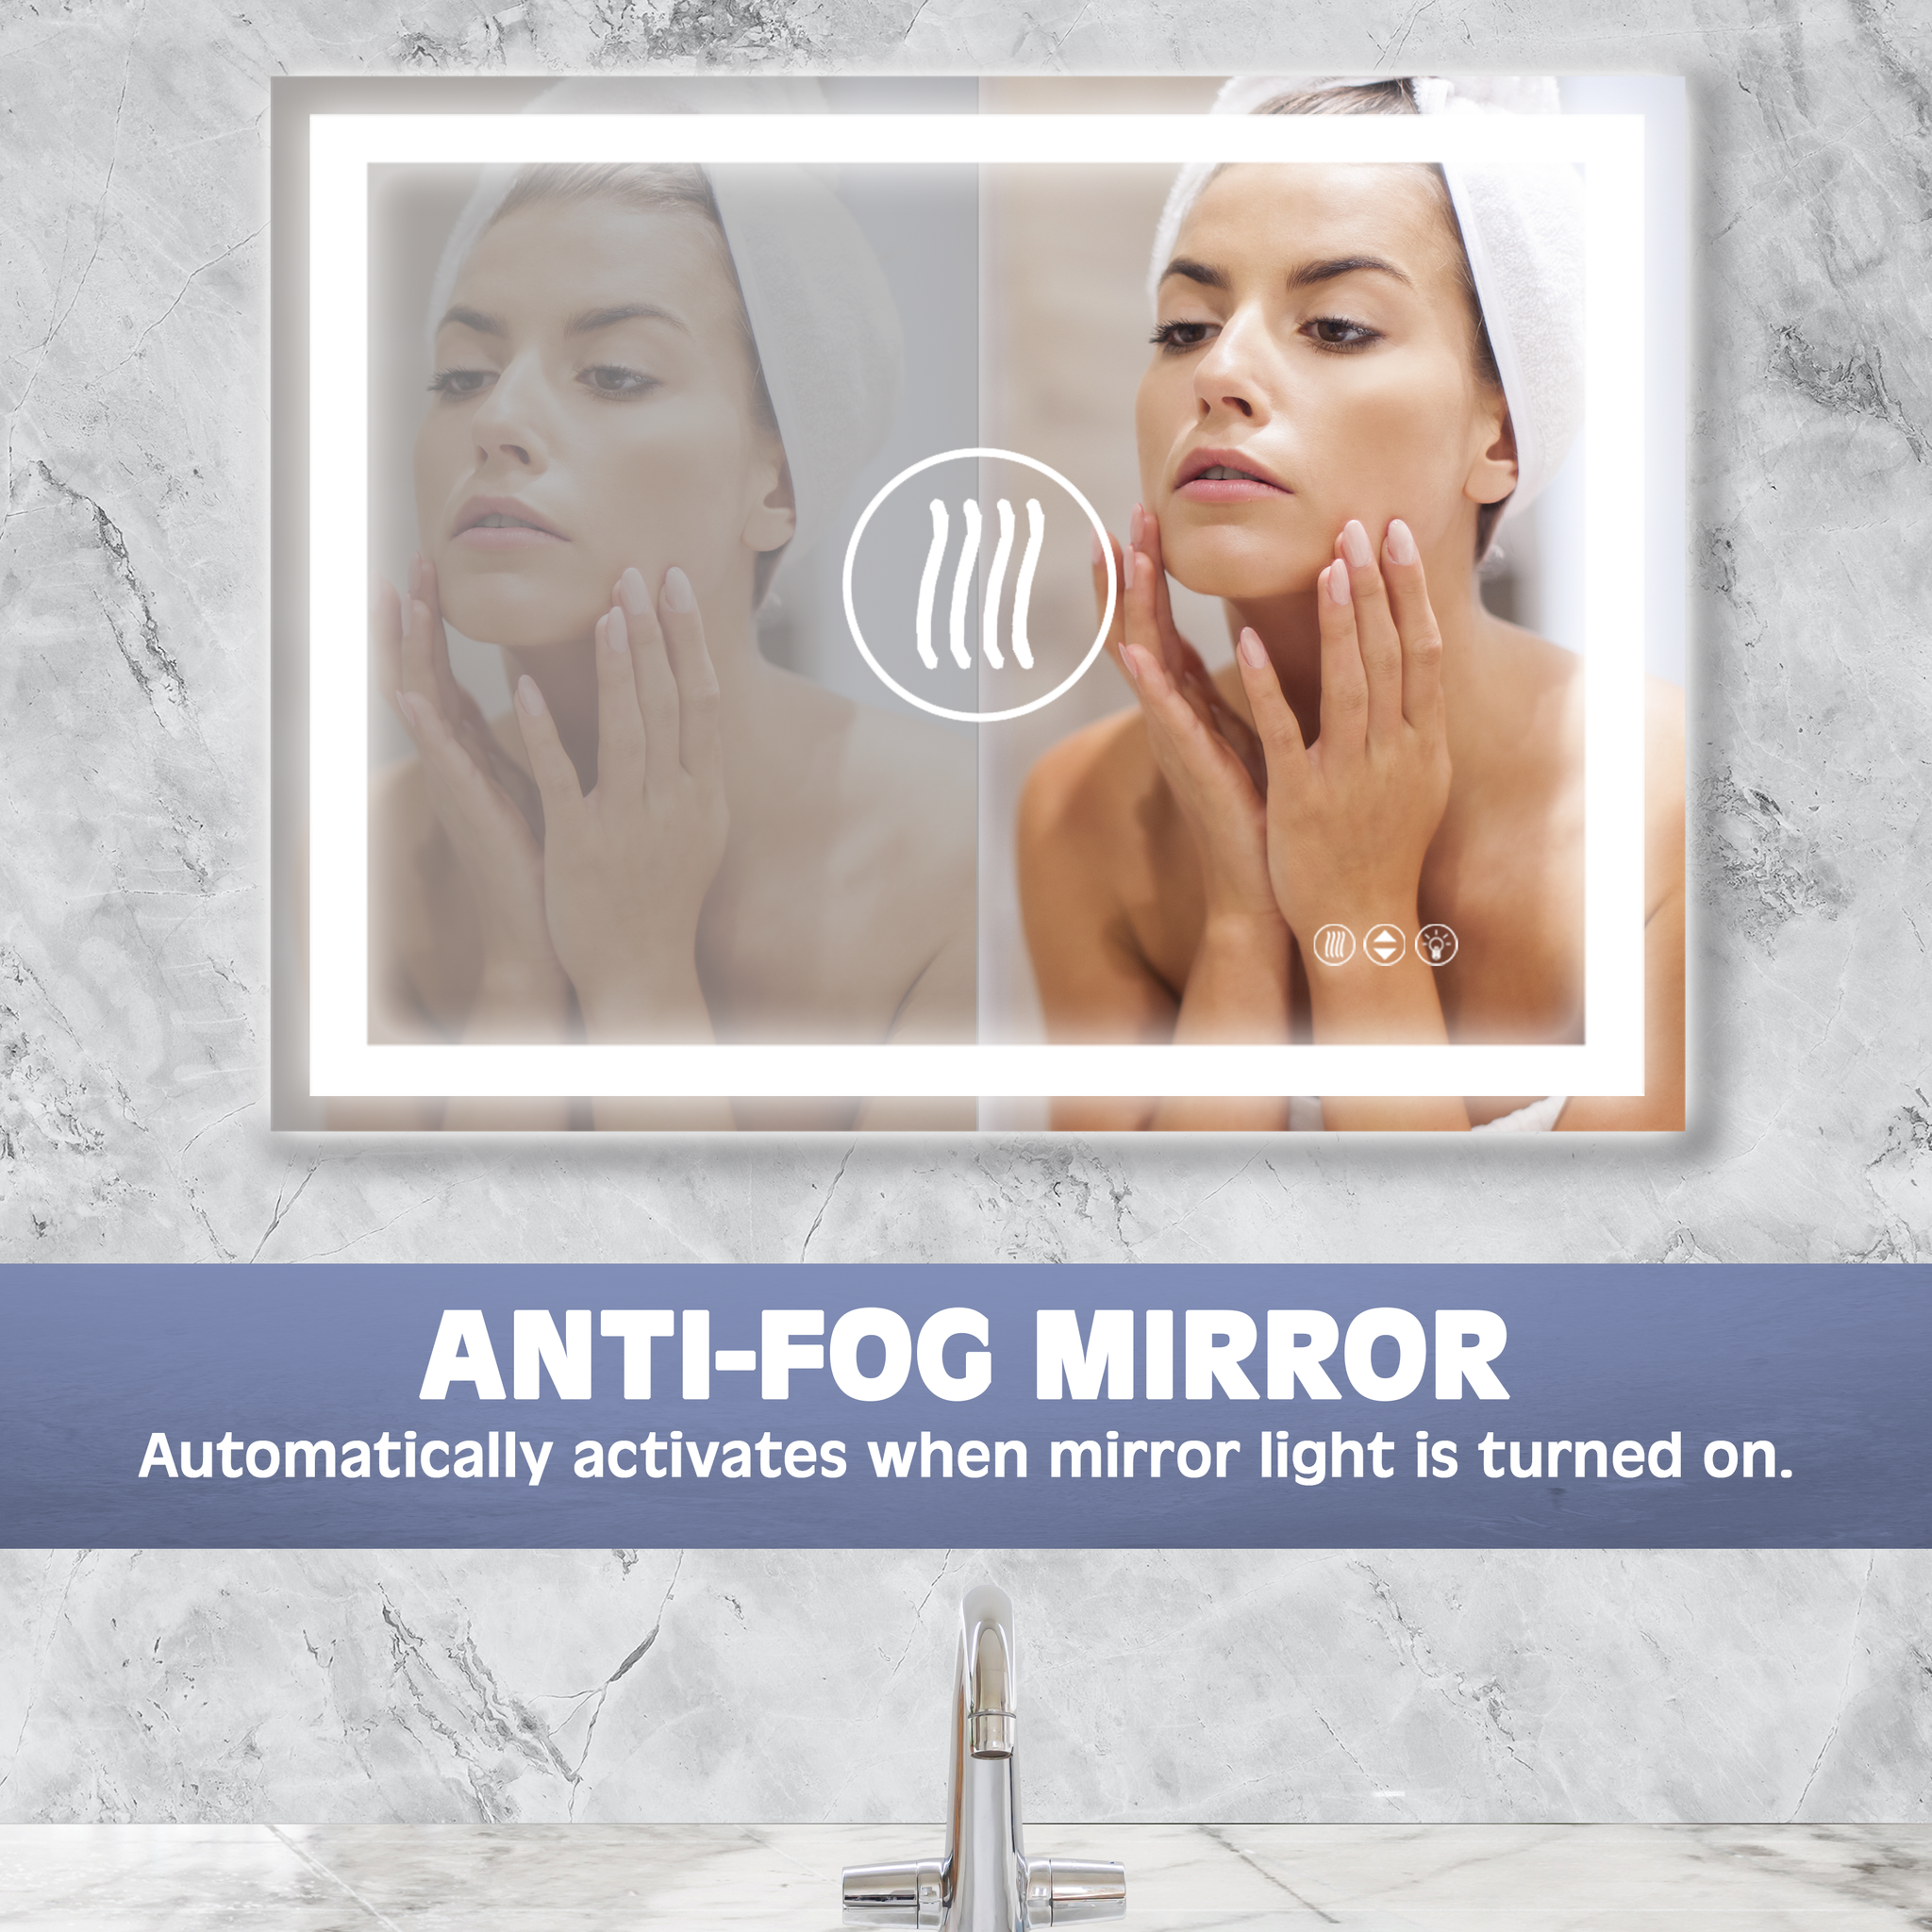 Luxury LED Bathroom/Wall Mirror with Front and Back Light, Anti Fog, Shatter Resistant and Adjustable Light Settings, 48 in x 36 in by Prominence Home